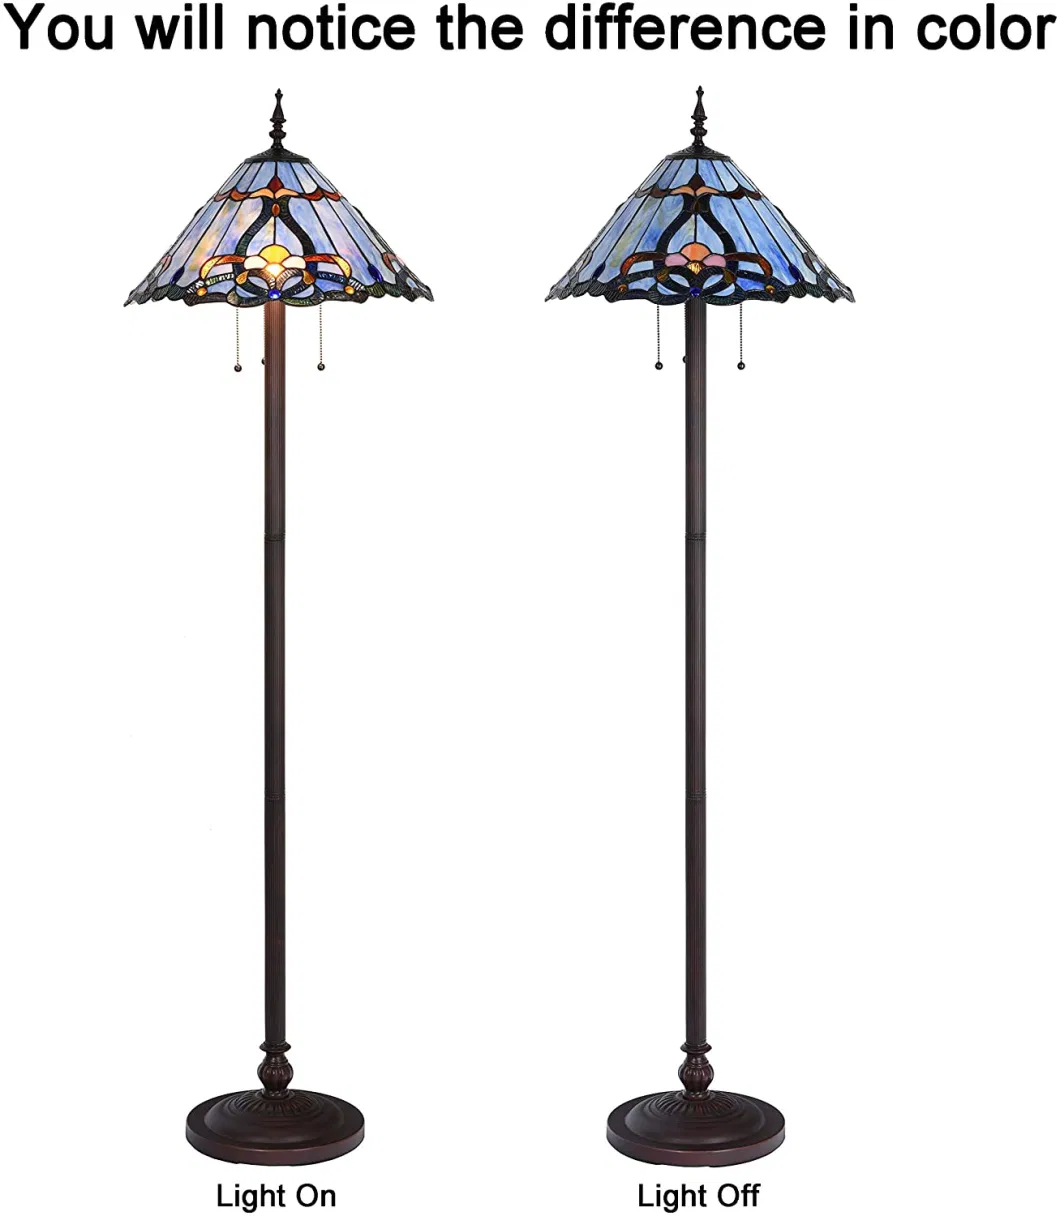 Bieye Baroque Tiffany Style Stained Glass Floor Lamp with 18 Inch Wide Blue Shade for Reading Working Bedroom Living Room, 3 Lights, 63 Inch Tall